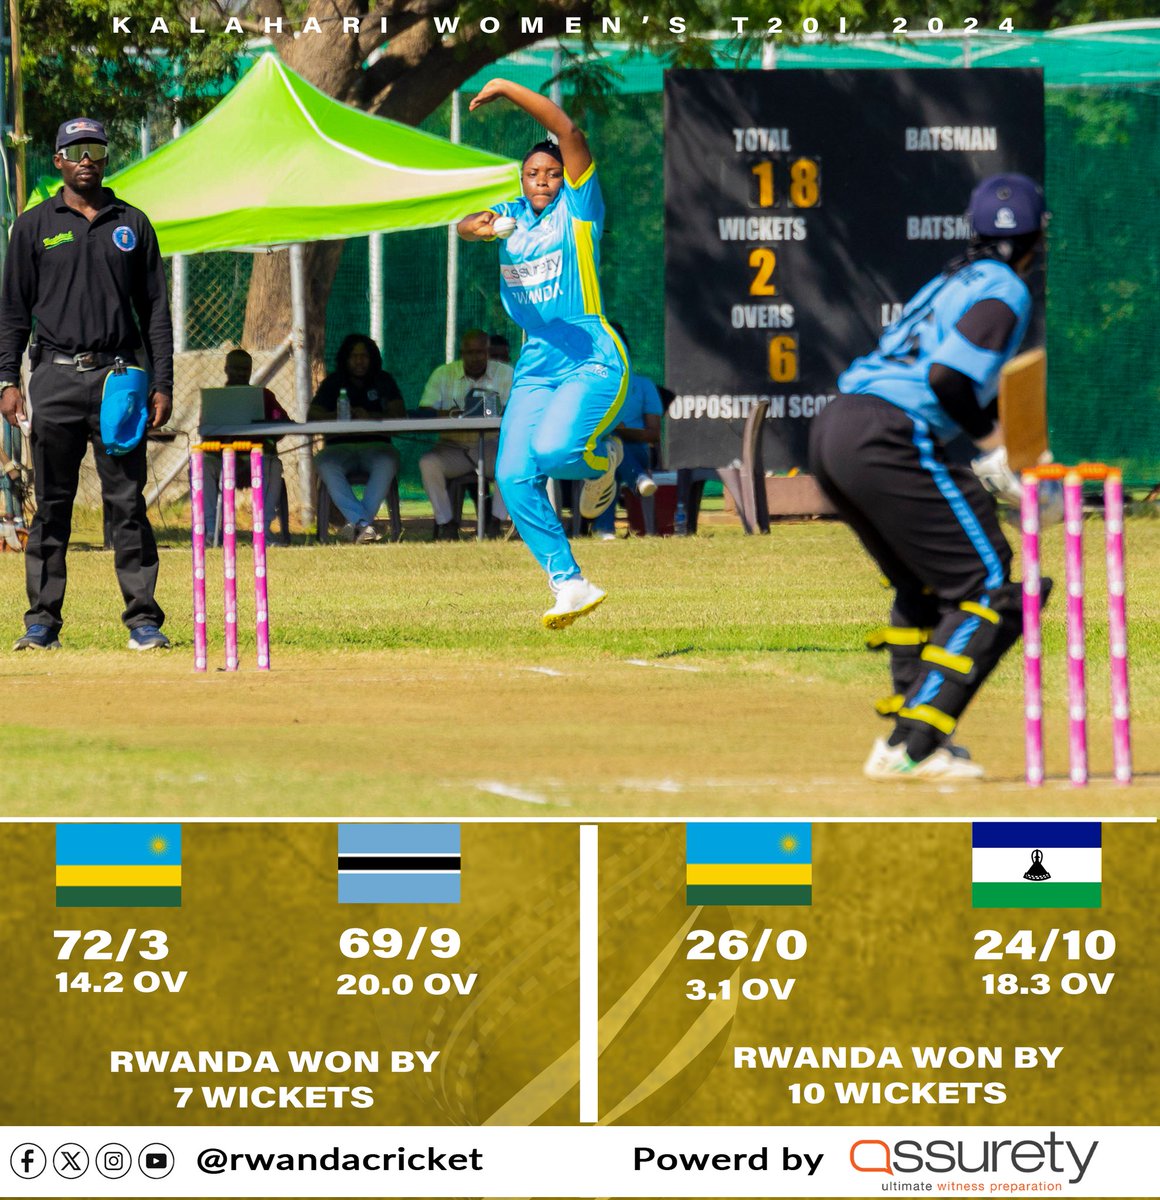 Rwanda ladies continue to shine at the BCA Karahari women tournament with two convincing victories against Host Bostwana and Lesotho.